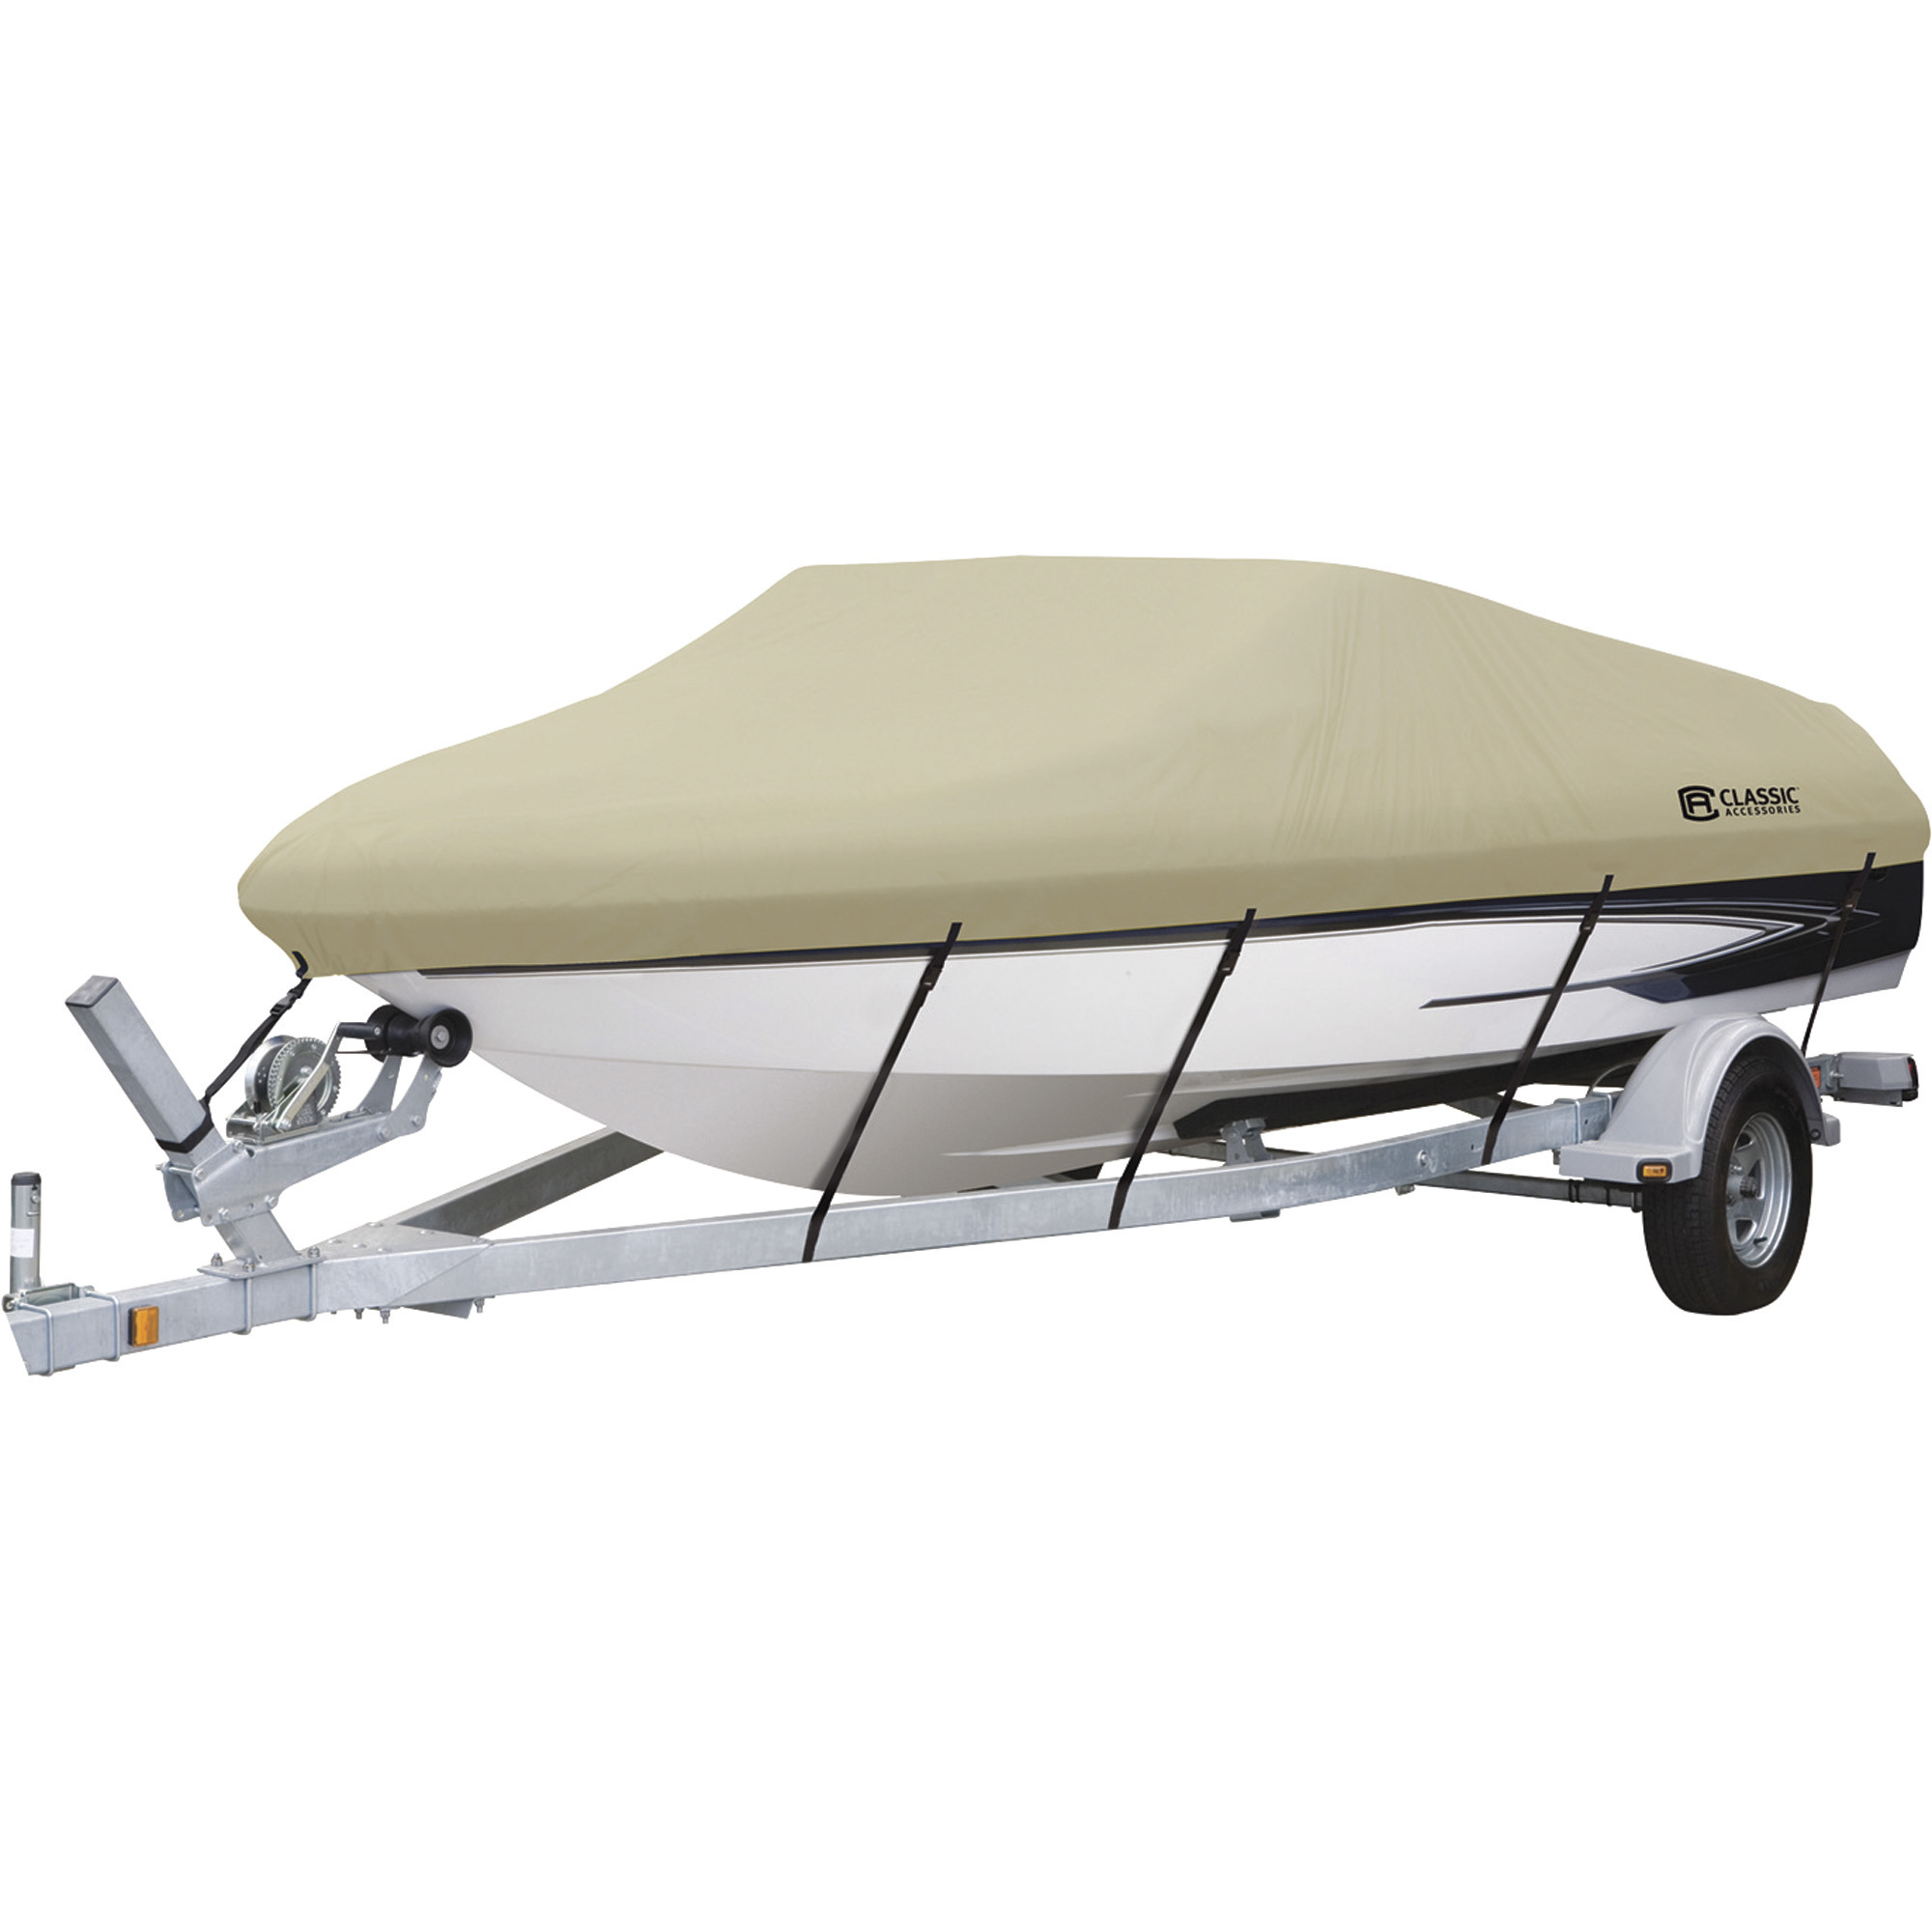 Classic Accessories DryGuard Waterproof Boat Cover, Fits 20ft.-22ft. x 106Inch W, Model 20-087-122401-00